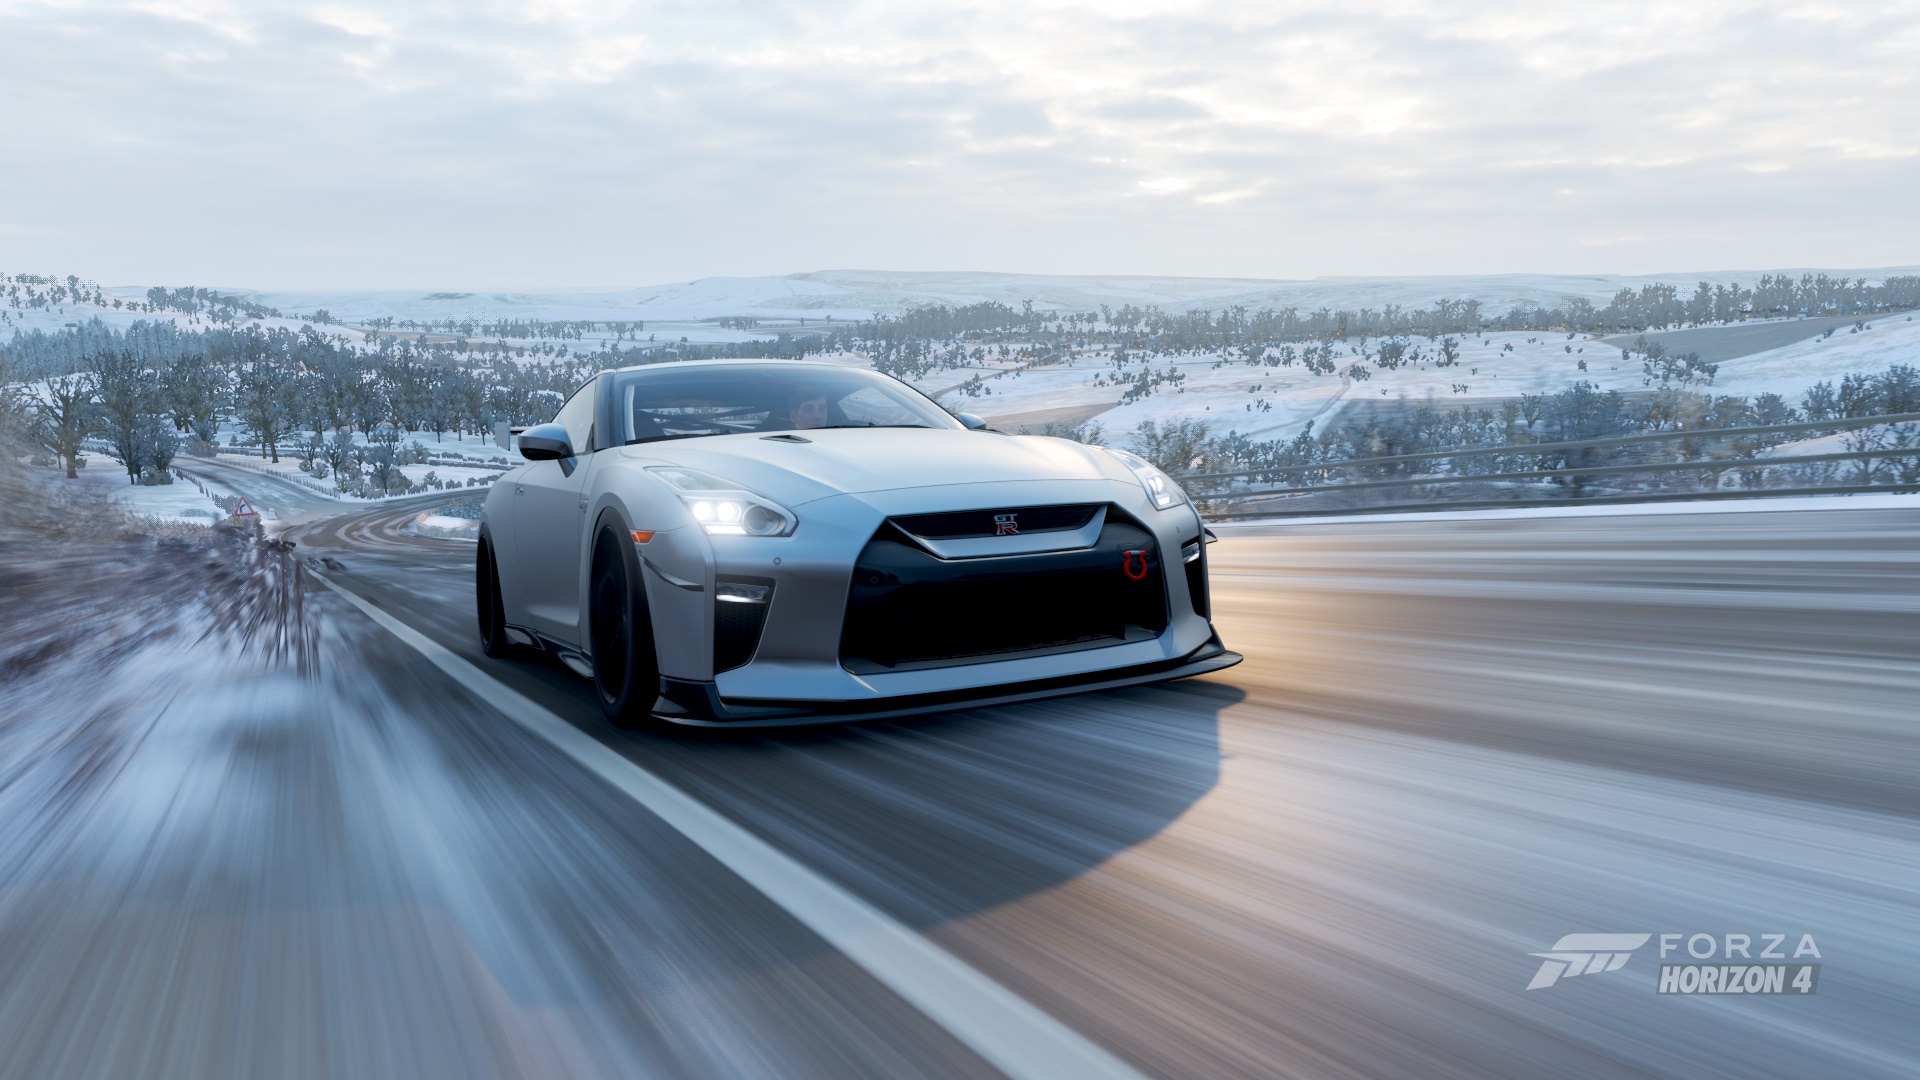 General 1920x1080 Forza Forza Horizon 4 car vehicle sports car Speed Racer race cars Nissan GT-R video games